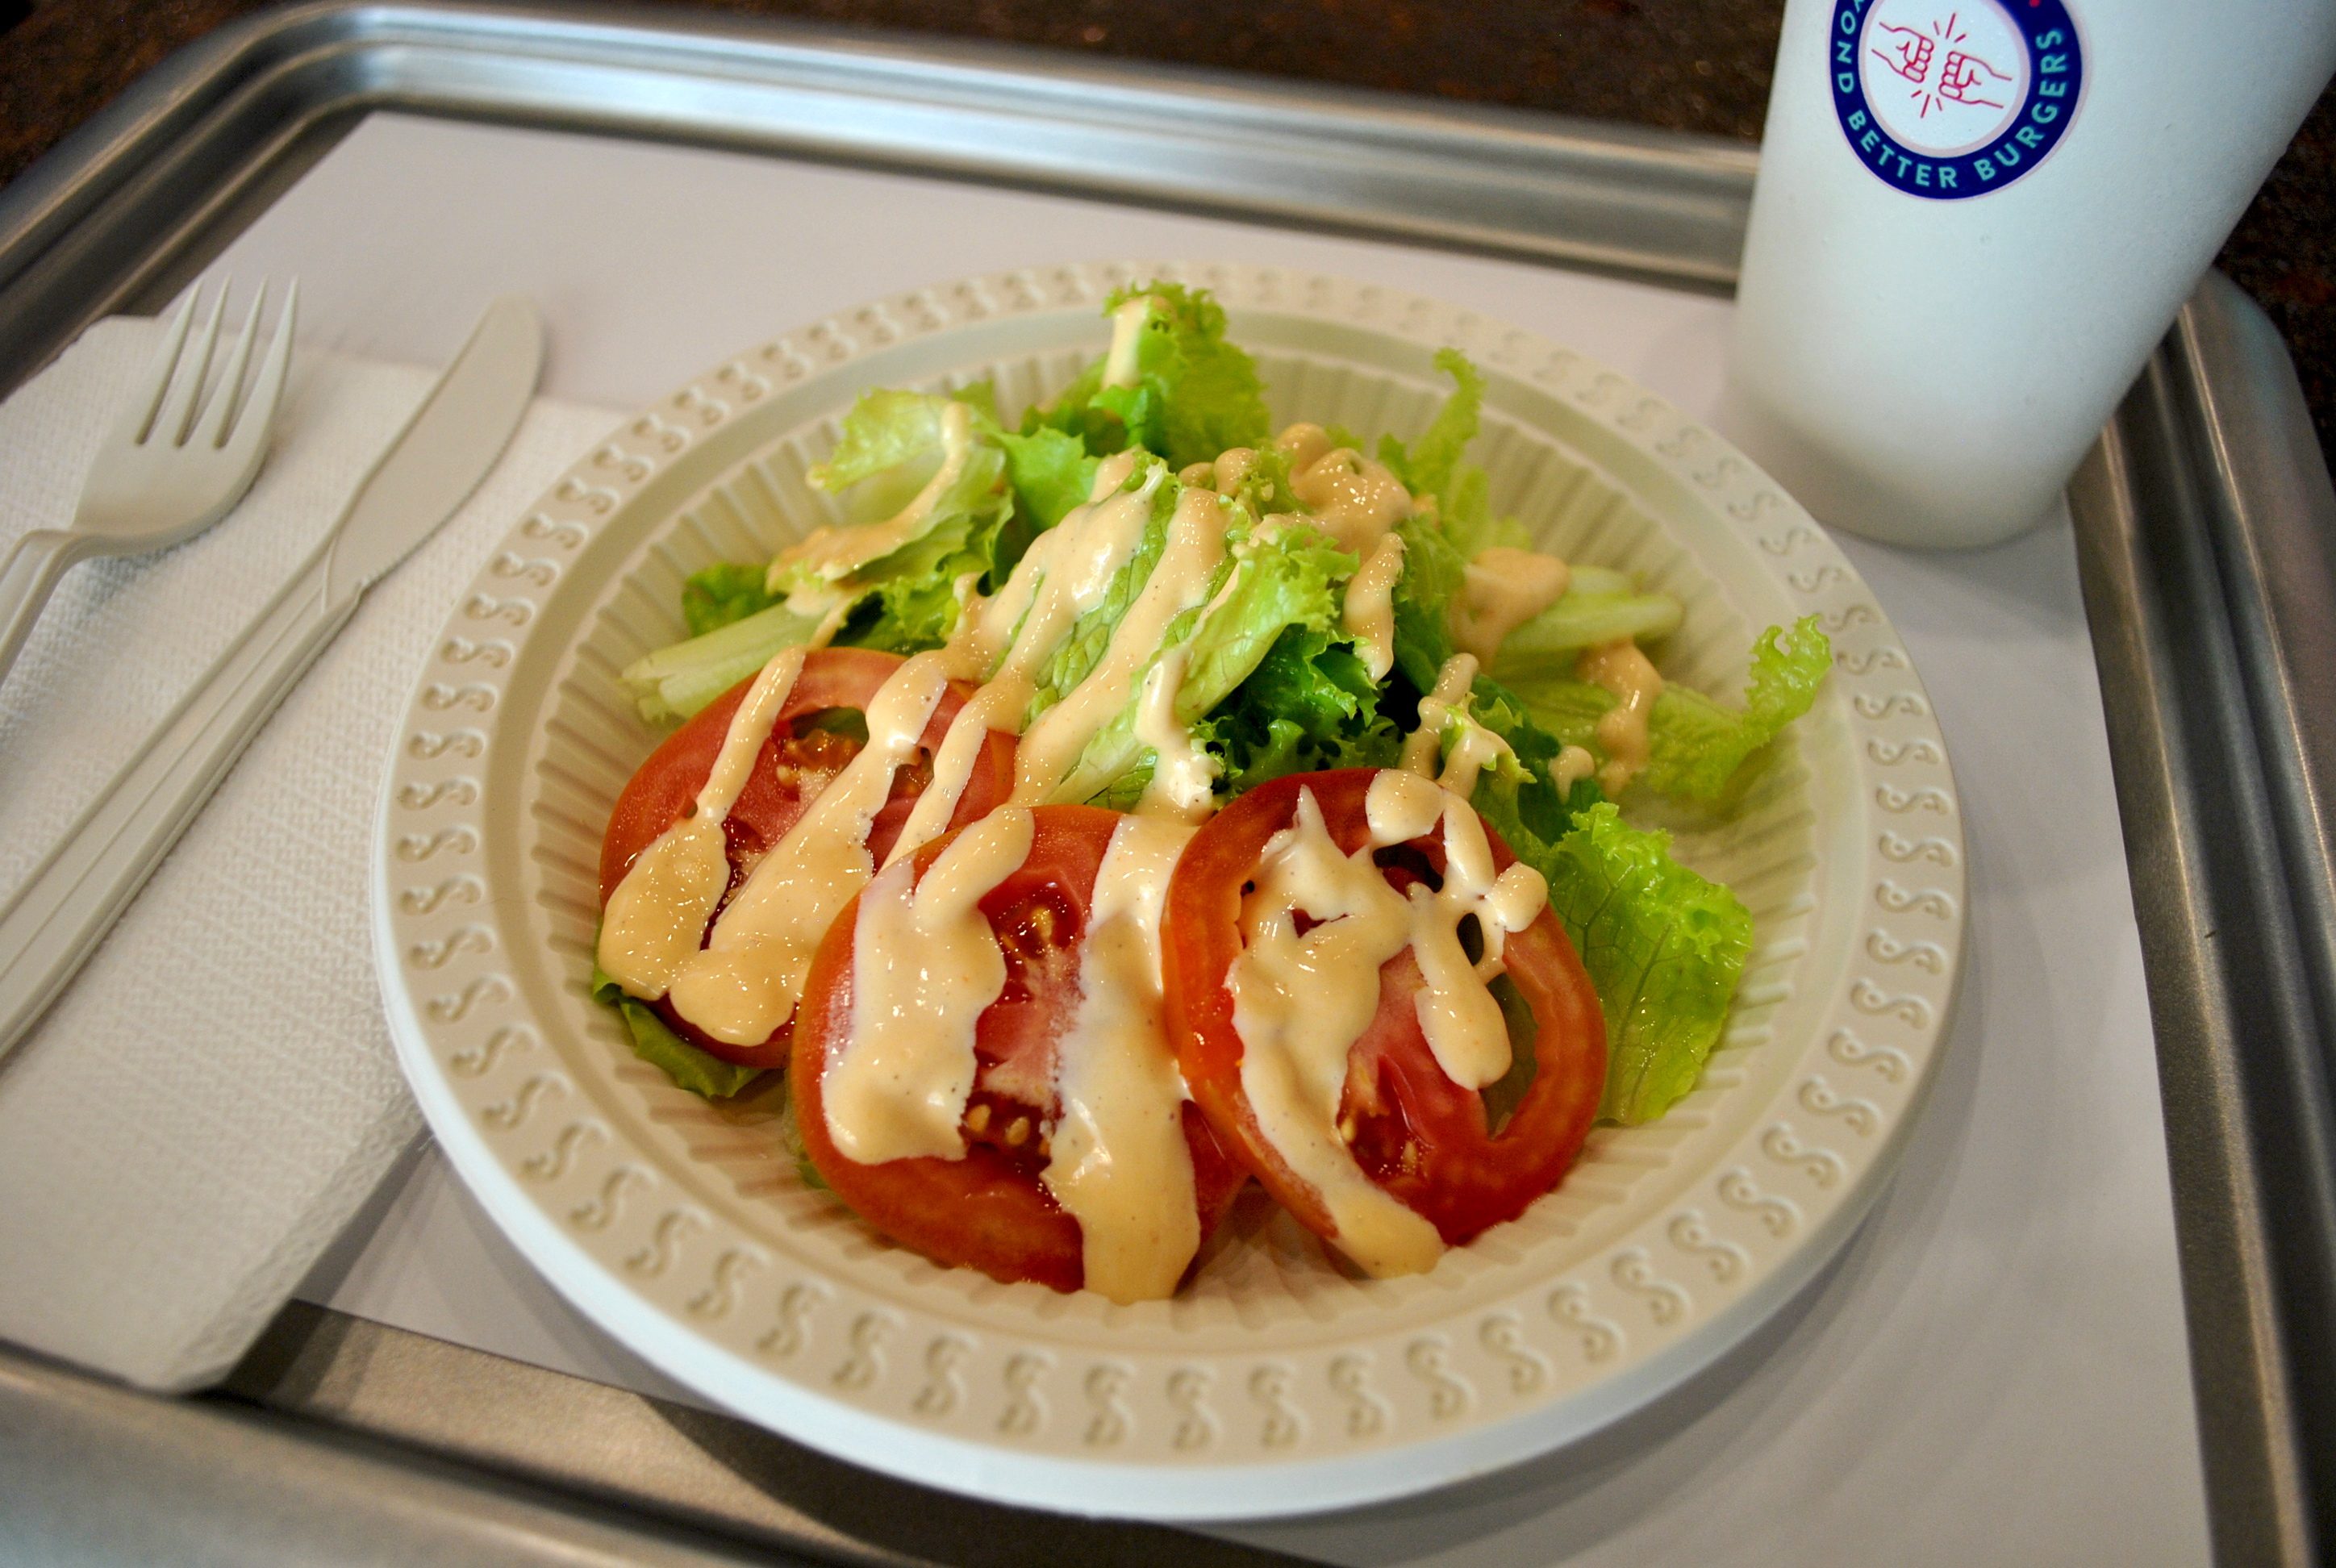 SIDE SALAD. Crisp greens and tomatoes are drizzled with a homemade caesar dressing. Photo by Steph Arnaldo/Rappler 